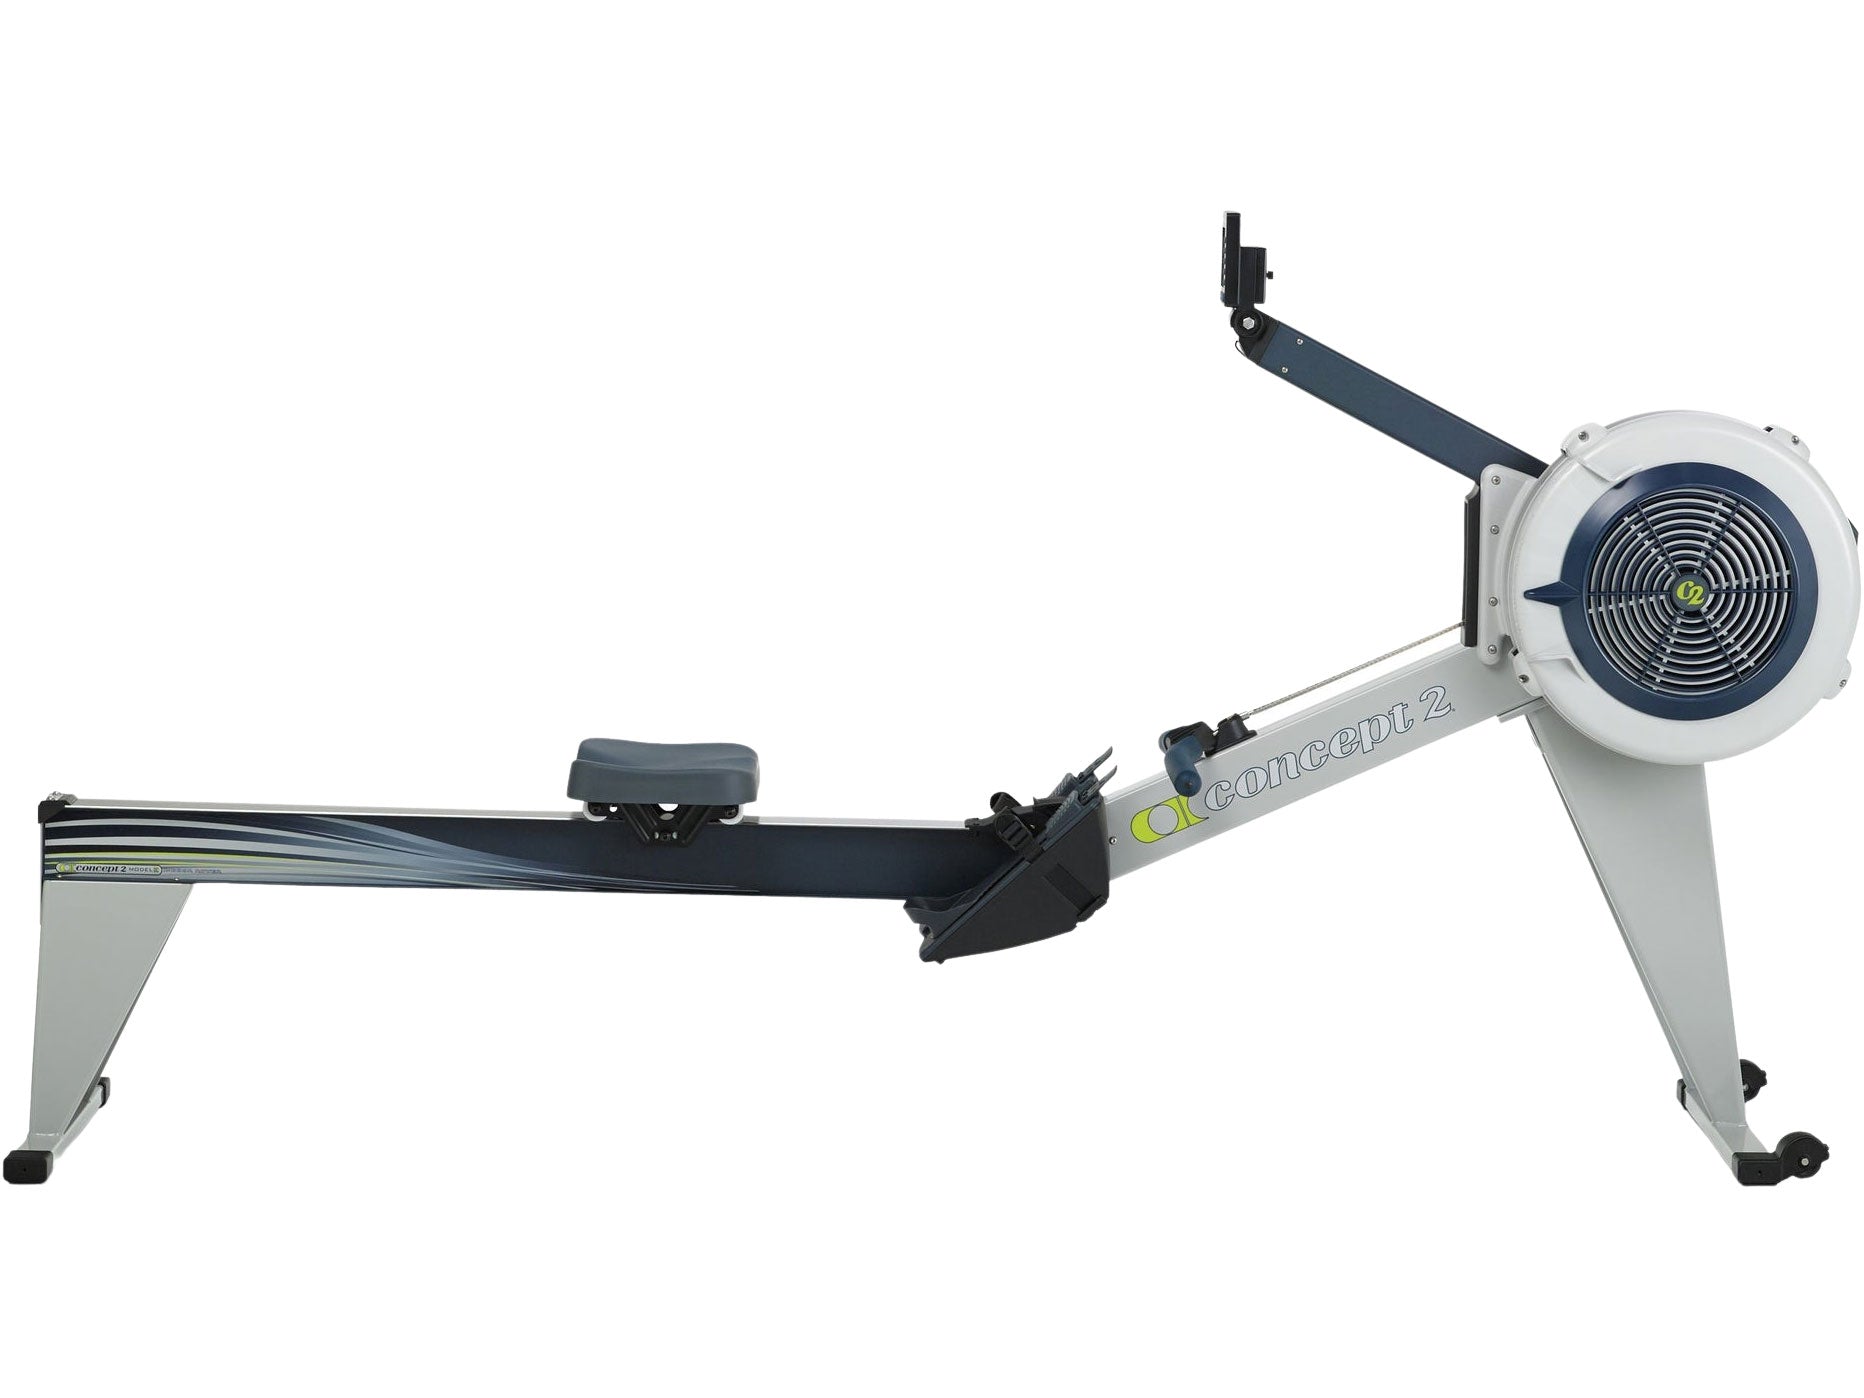 Factory photo of a Used Concept 2 Model E Indoor Rower